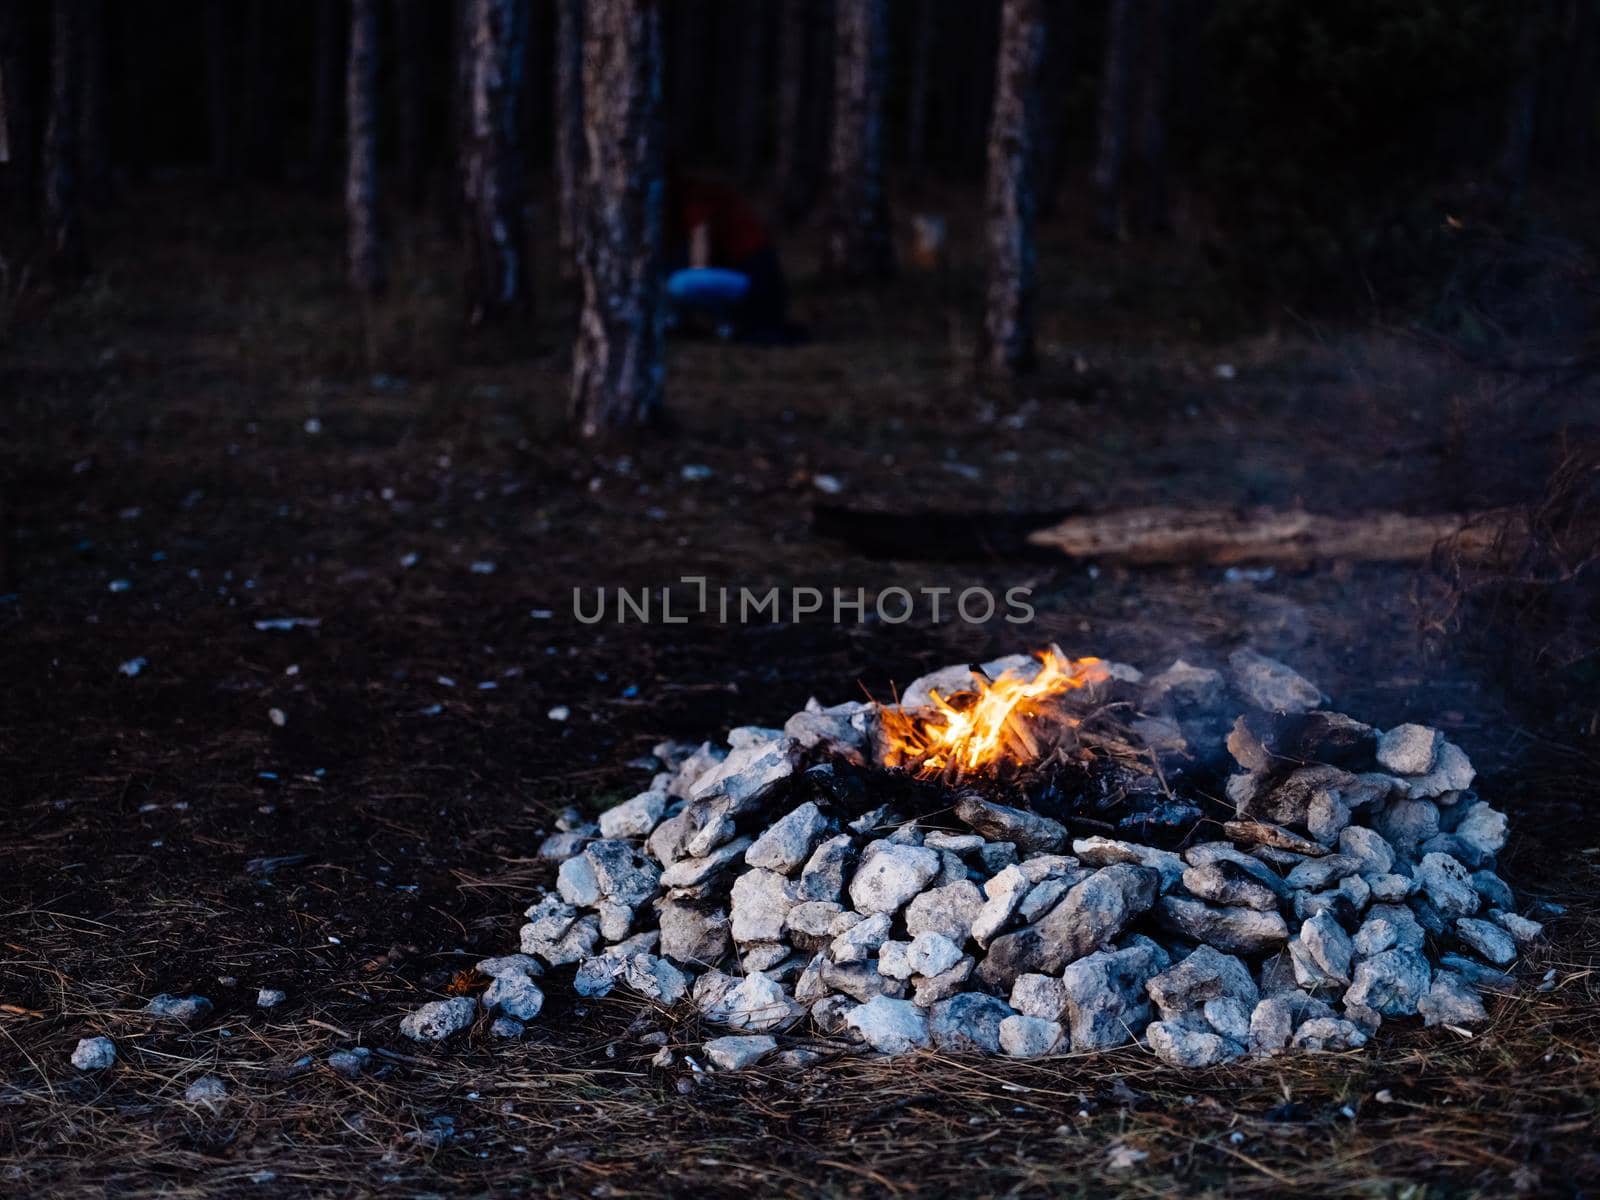 kindled fire in nature in the forest and trees In the background. High quality photo